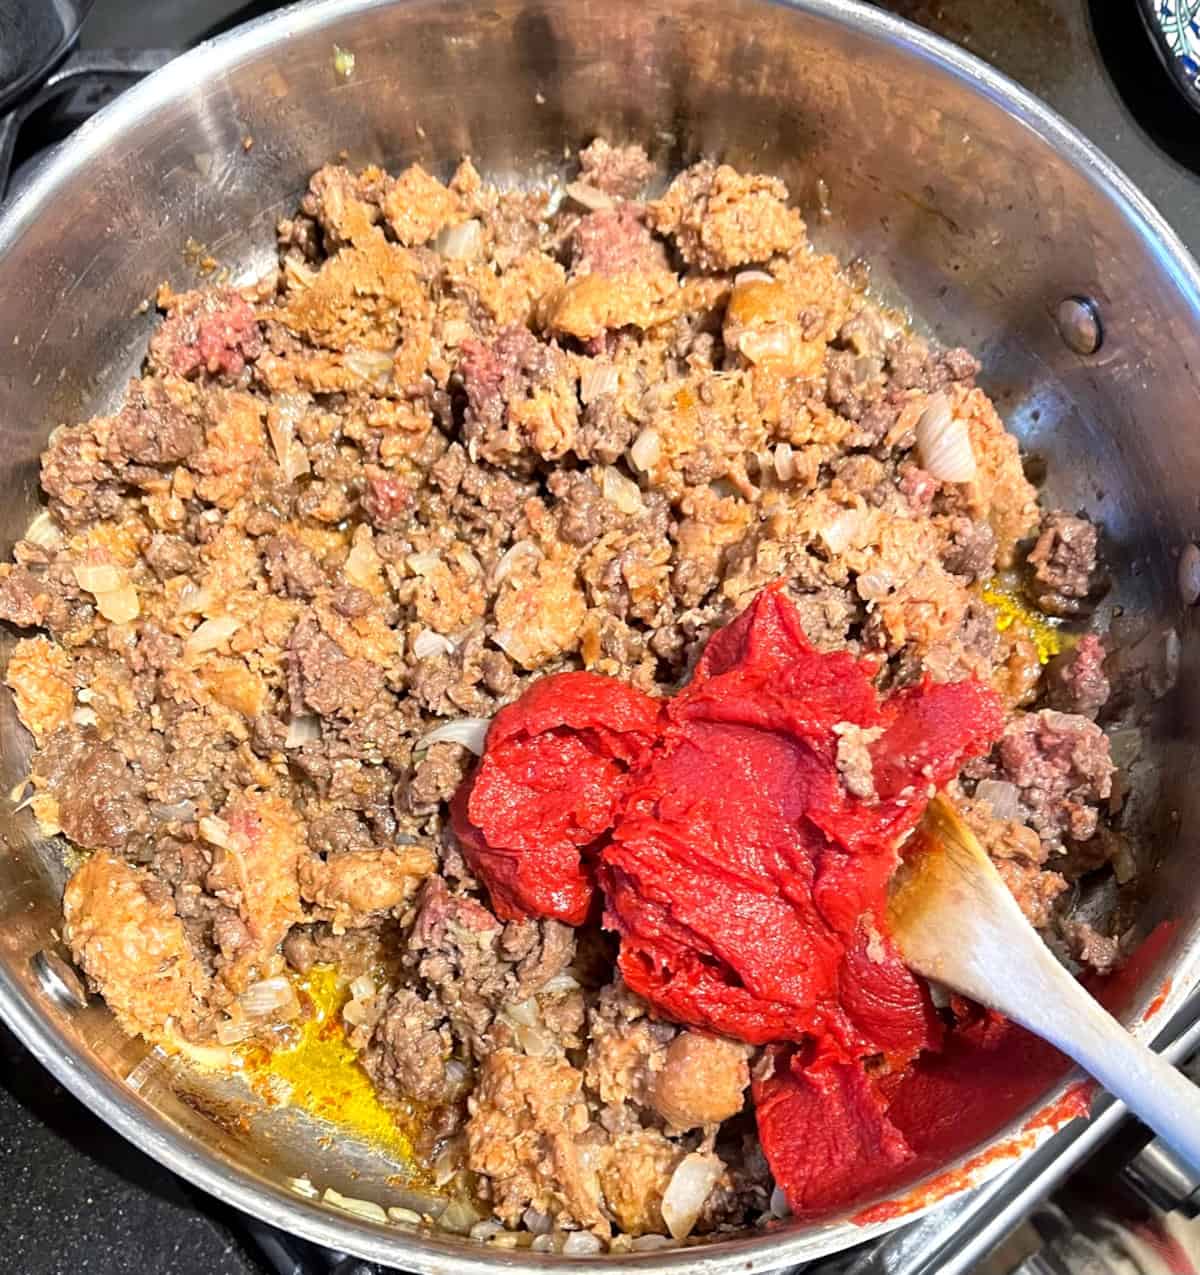 Tomato paste added to vegan meats in saute pan.